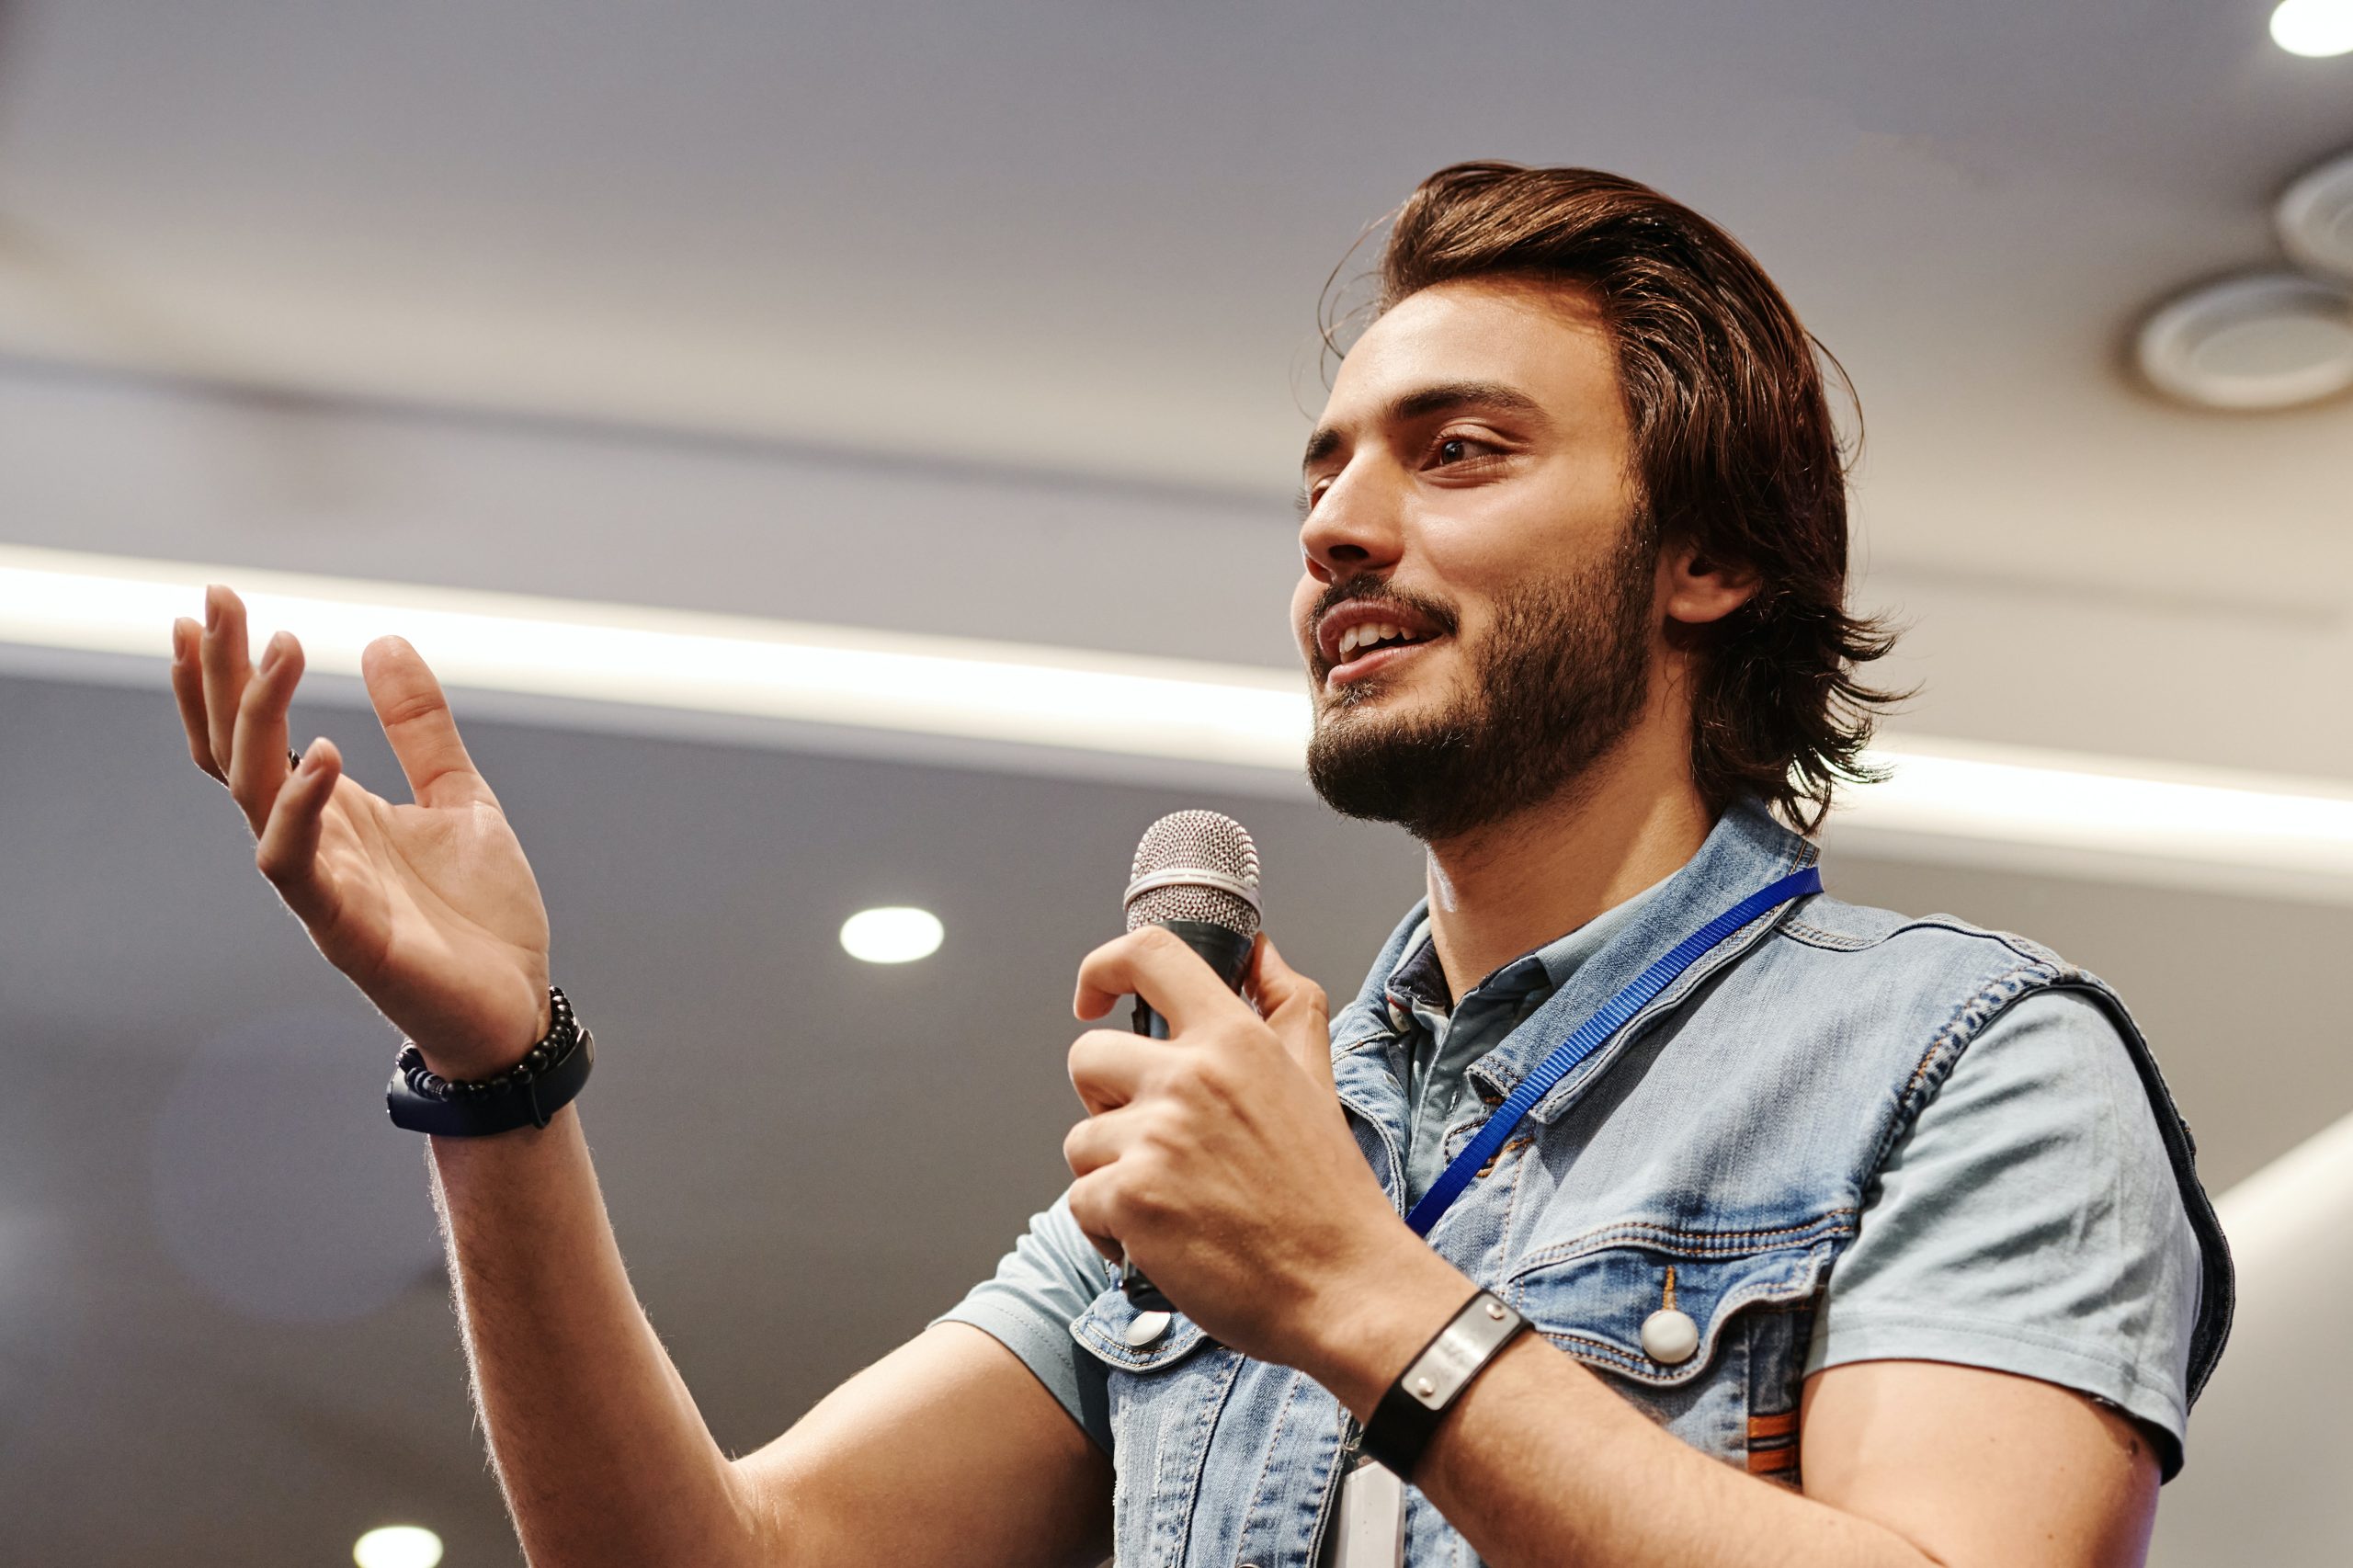 A young man holding a microphone smiles and gestures with his hand towards the audience.